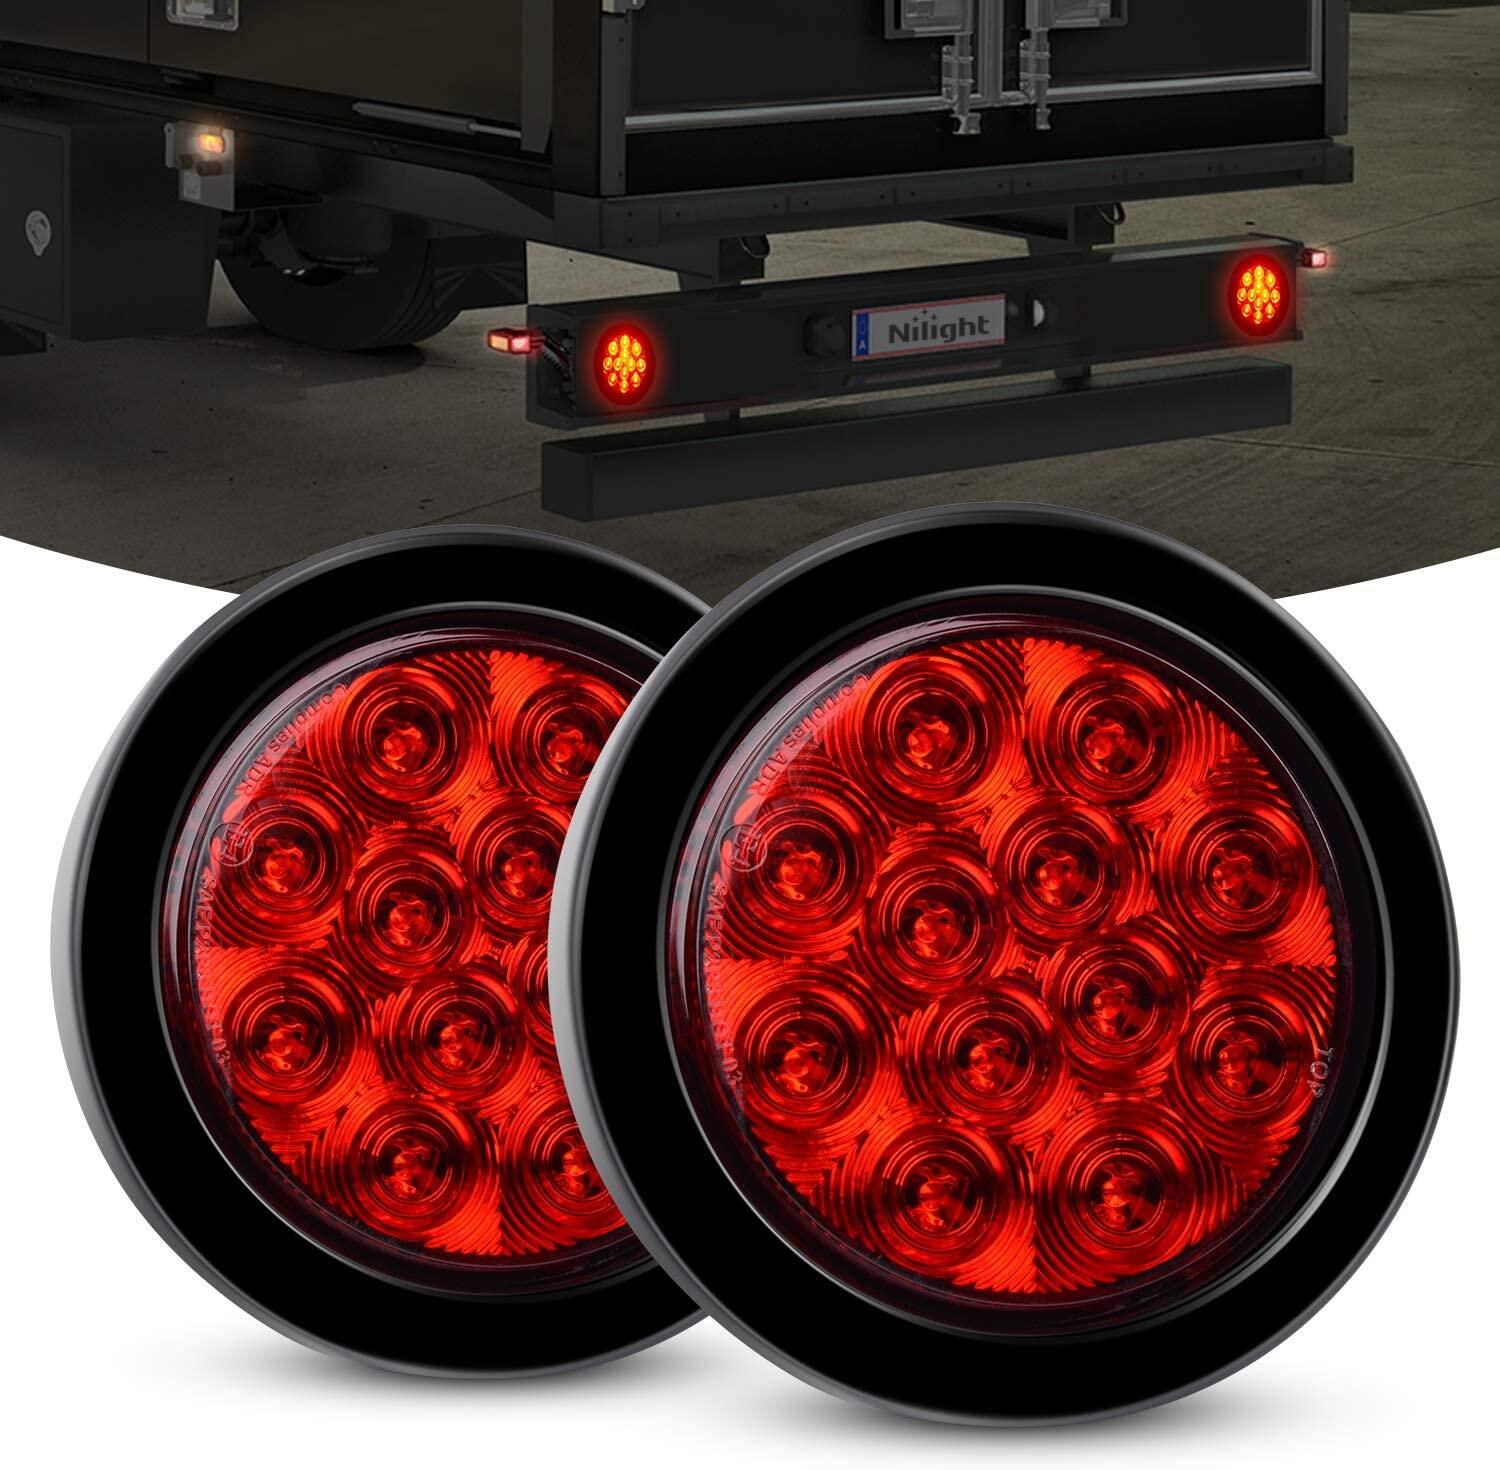 Pack of 8 Grommet Plug Included Stop Turn Signal Lights for Truck Trailer RV Boat Bus Waterproof 4inch Round Red LED Trailer Tail Lights 